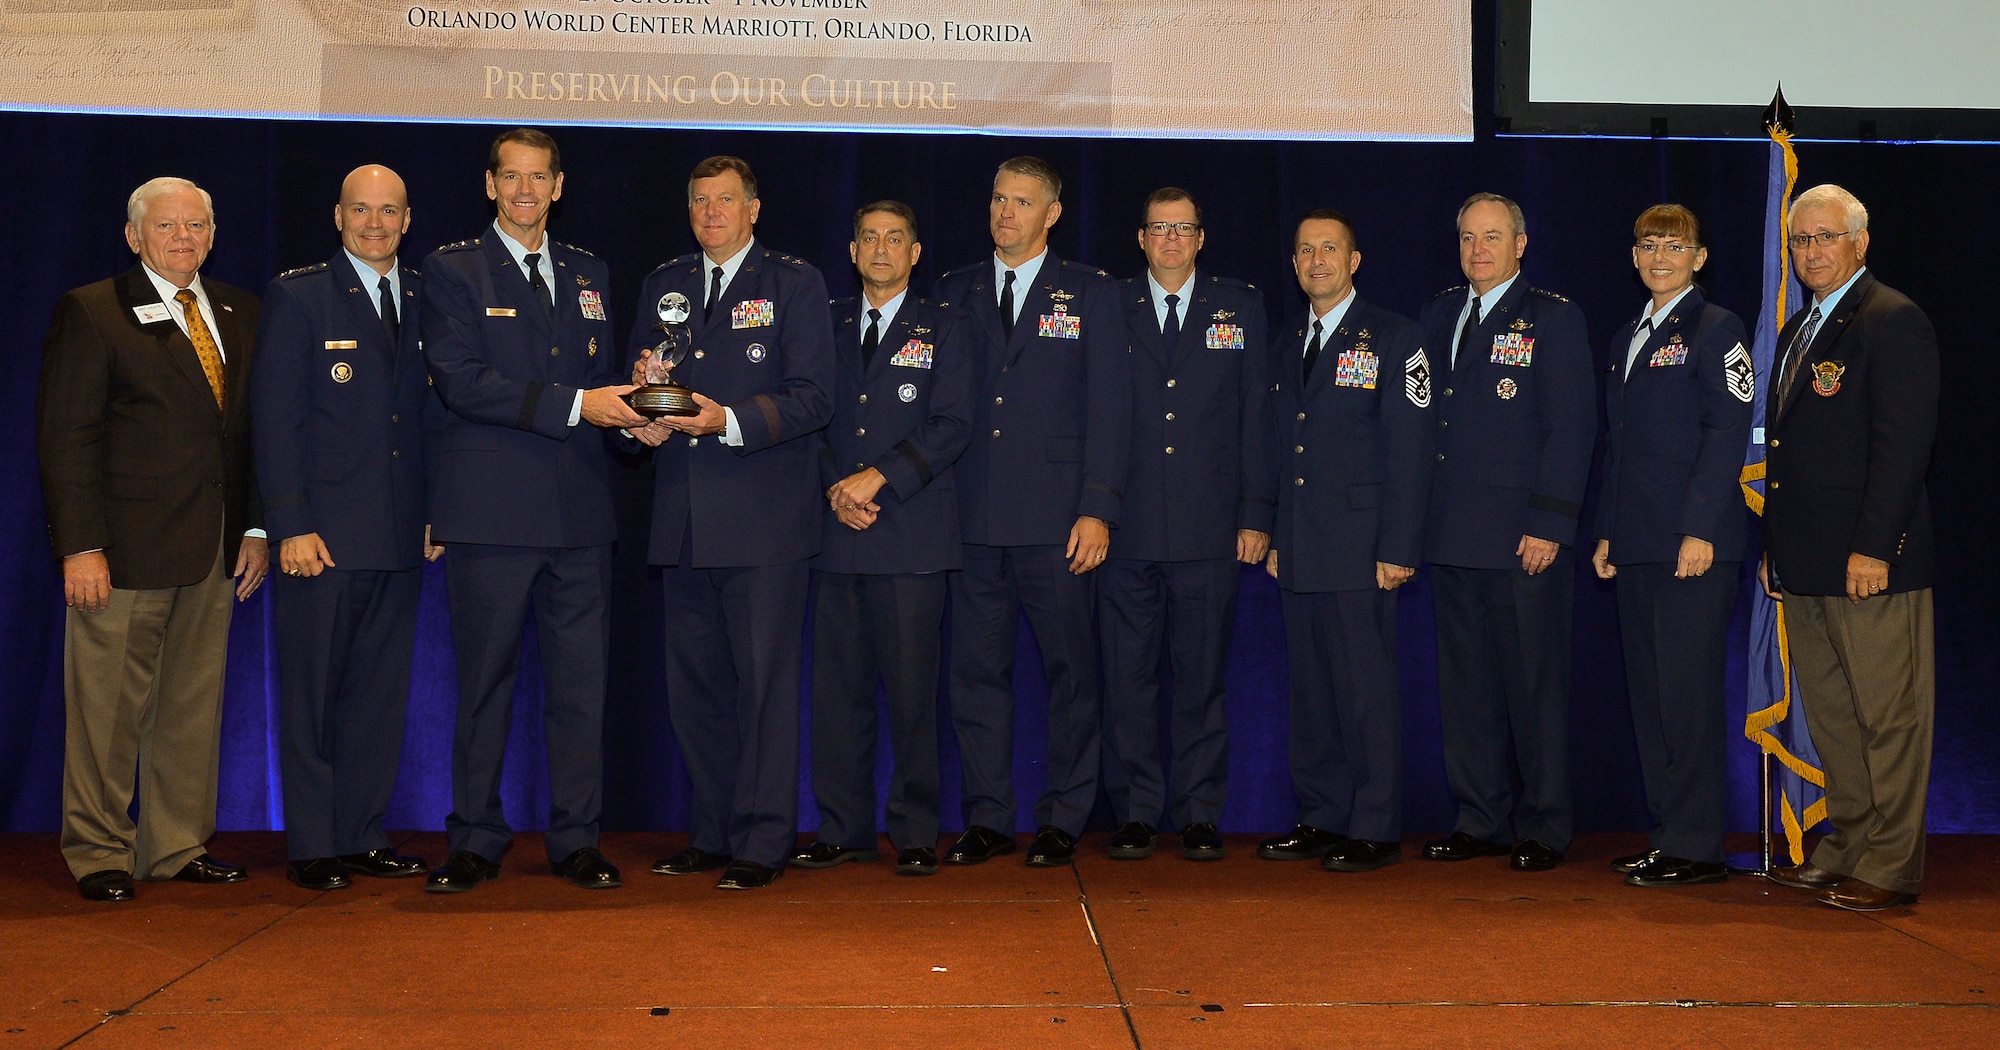 The director of the Air National Guard, Lt. Gen. Stanley Clarke III (third from left) presents Maj. Gen. Edward Tonini (fourth from left), adjutant general of the Commonwealth of Kentucky, with the 2015 Airlift/Tanker Association’s Major General Stanley F.H. Newman Outstanding Unit Award during the annual A/TA Convention in Orlando, Fla., Oct. 30, 2015. The award was bestowed this year on the Kentucky Air National Guard’s 123rd Airlift Wing, based in Louisville, for exceptional performance from July 1, 2014 to June 30, 2015. Also pictured (left to eight) are Gen. Arthur Lichte (retired), chairman of the A/TA; Gen. Carlton Everhart II, commander of Air Mobility Command; Brig. Gen. Warren Hurst, Kentucky’s assistant adjutant general for Air; Col. Barry Gorter, commander of the 123rd Airlift Wing; Col. Robert Hamm, commander of the 123rd Operations Group; Chief Master Sgt. Ray Dawson, command chief of the 123rd Airlift Wing; Gen. Mark Welsh III, chief of staff of the U.S. Air Force; Chief Master Sgt. Victoria Gamble, command chief of Air Mobility Command; and Lt. Gen. Christopher Kelly (retired), former vice commander of Air Mobility Command. (U.S. Air Force photo).